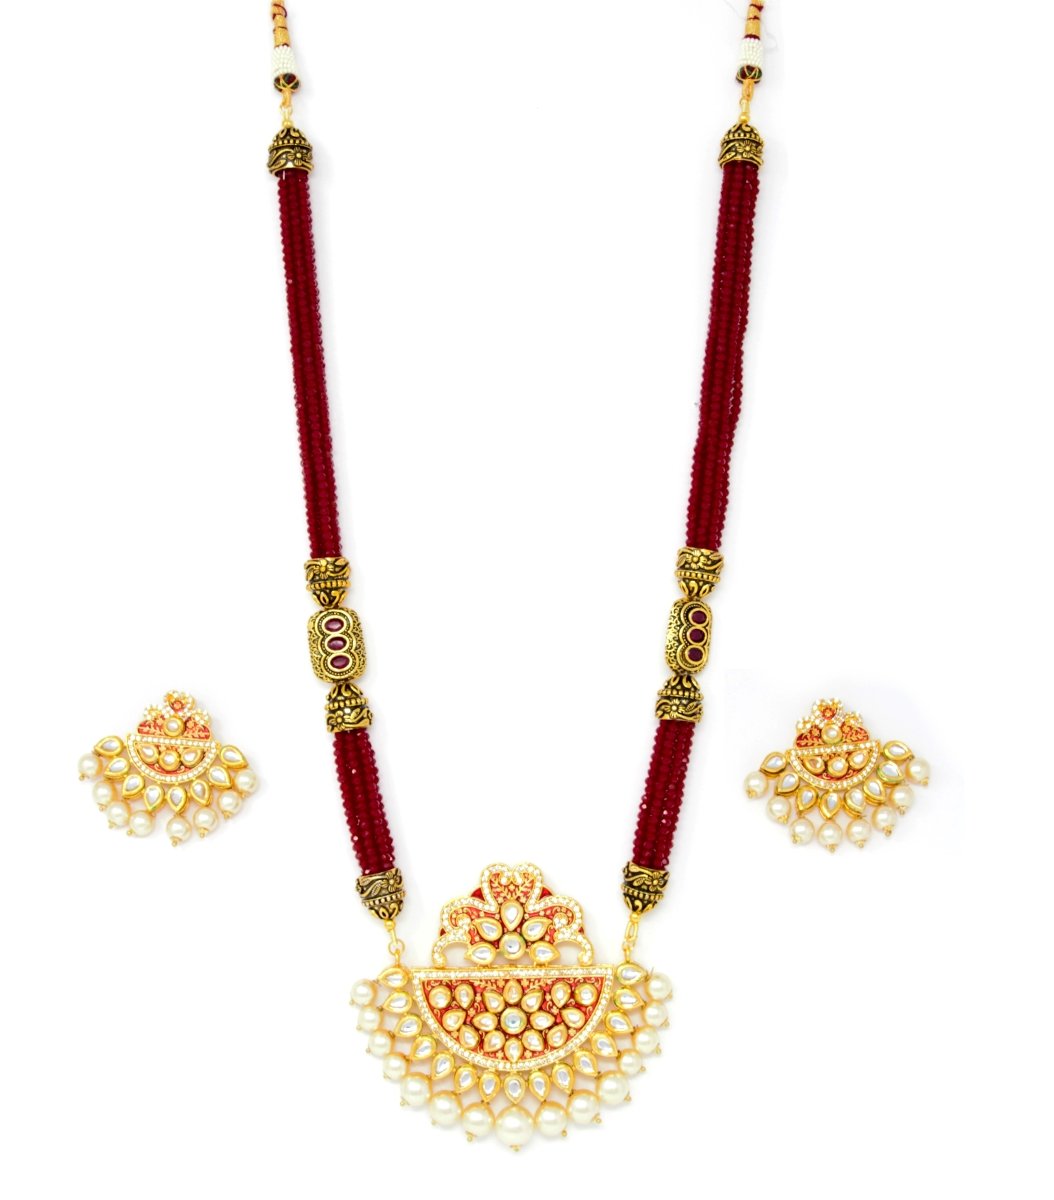 Maroon Layered Beads Gold Kundan Pendant Long Necklace With Pearl Drops